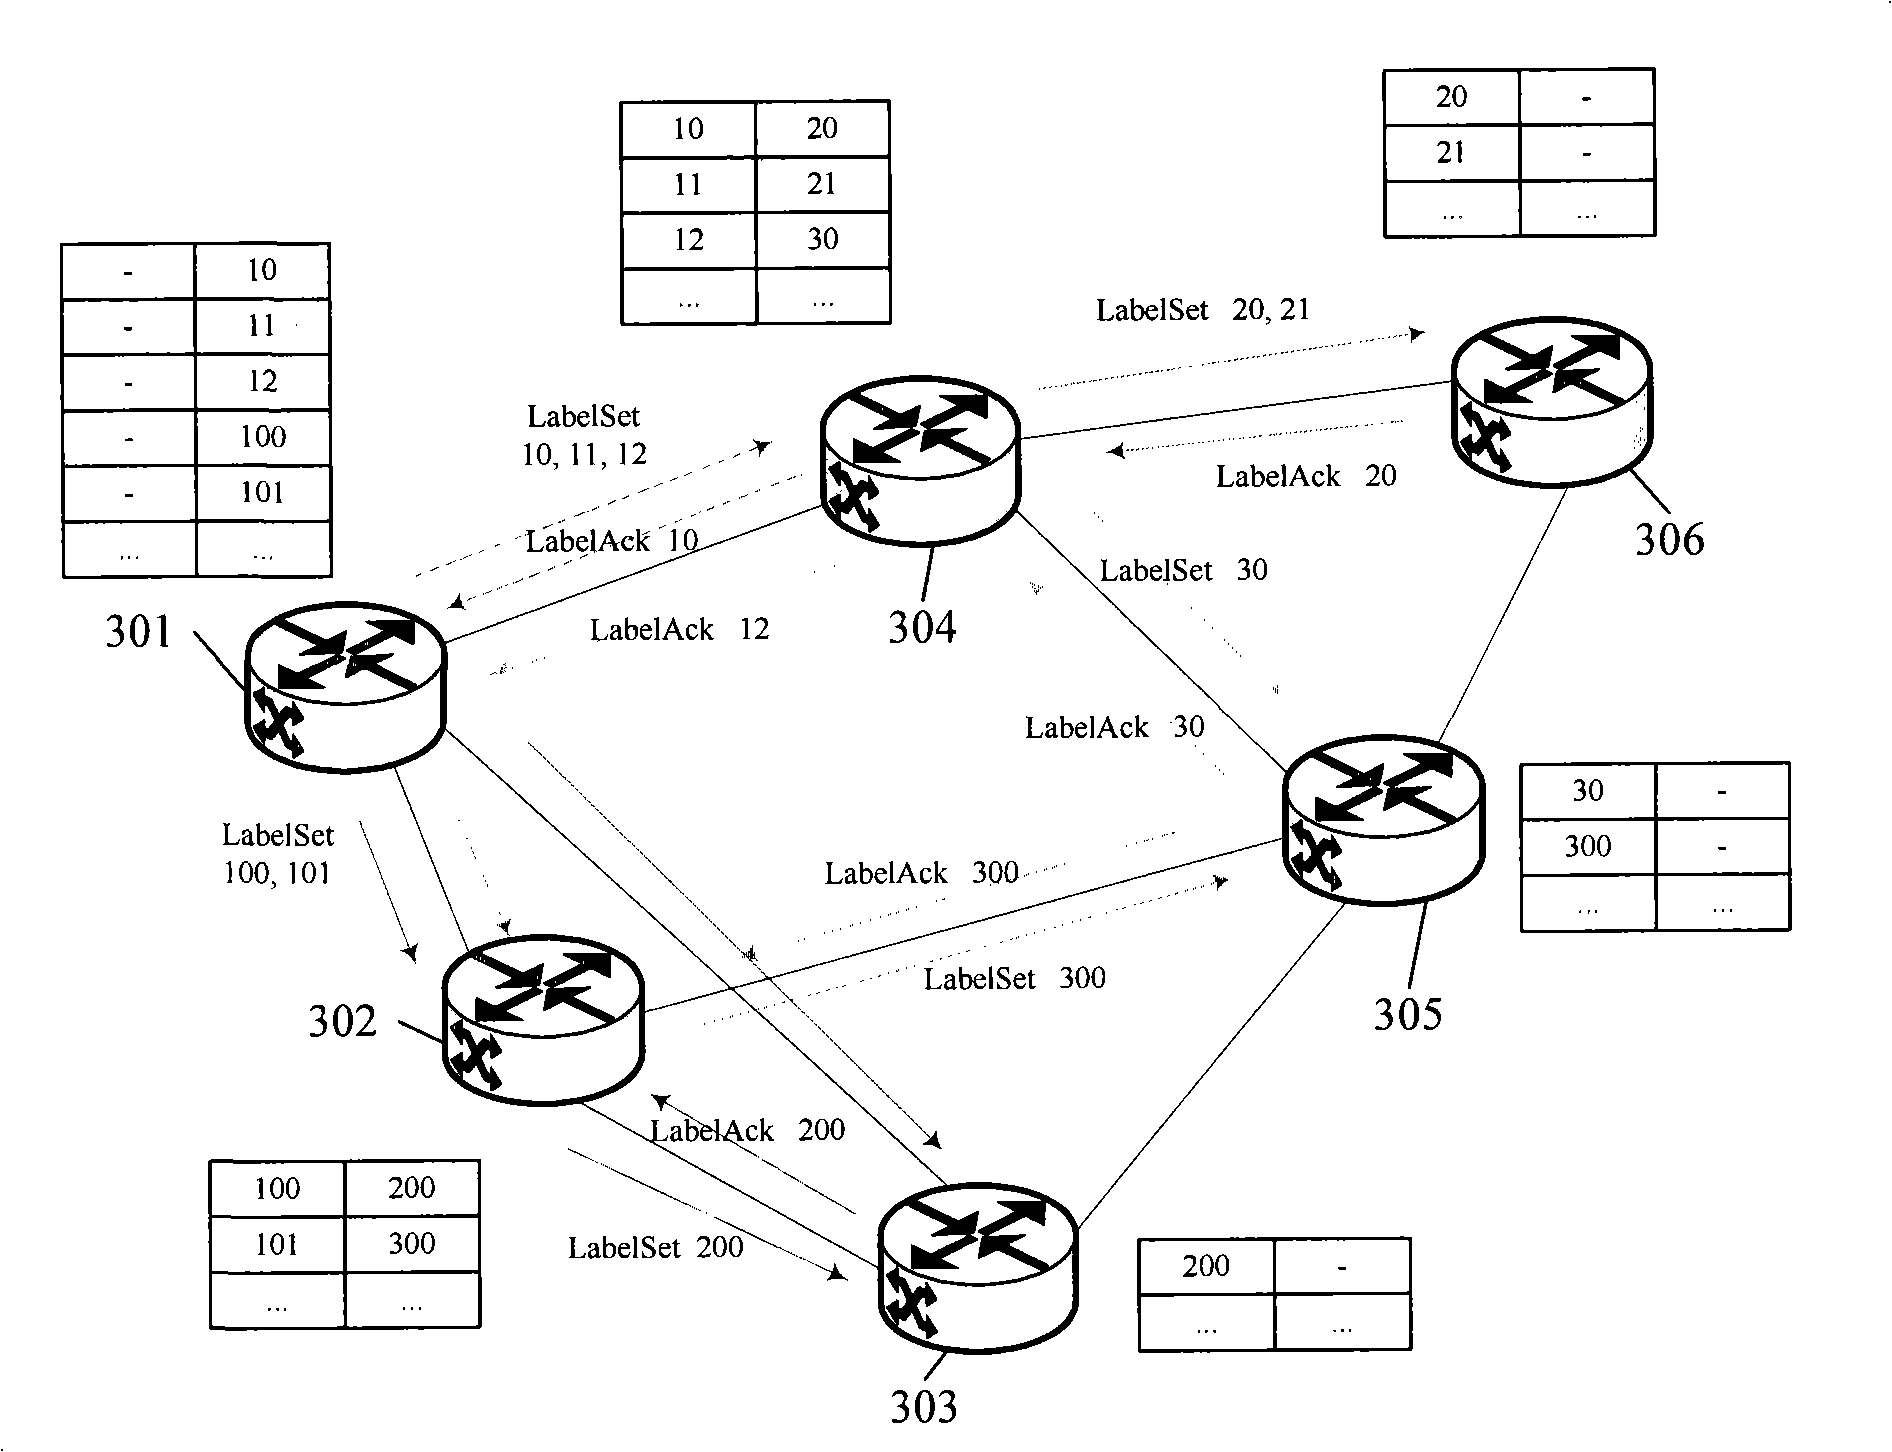 Label pre-distributing mechanism based on T-MPLS grouping conveying network